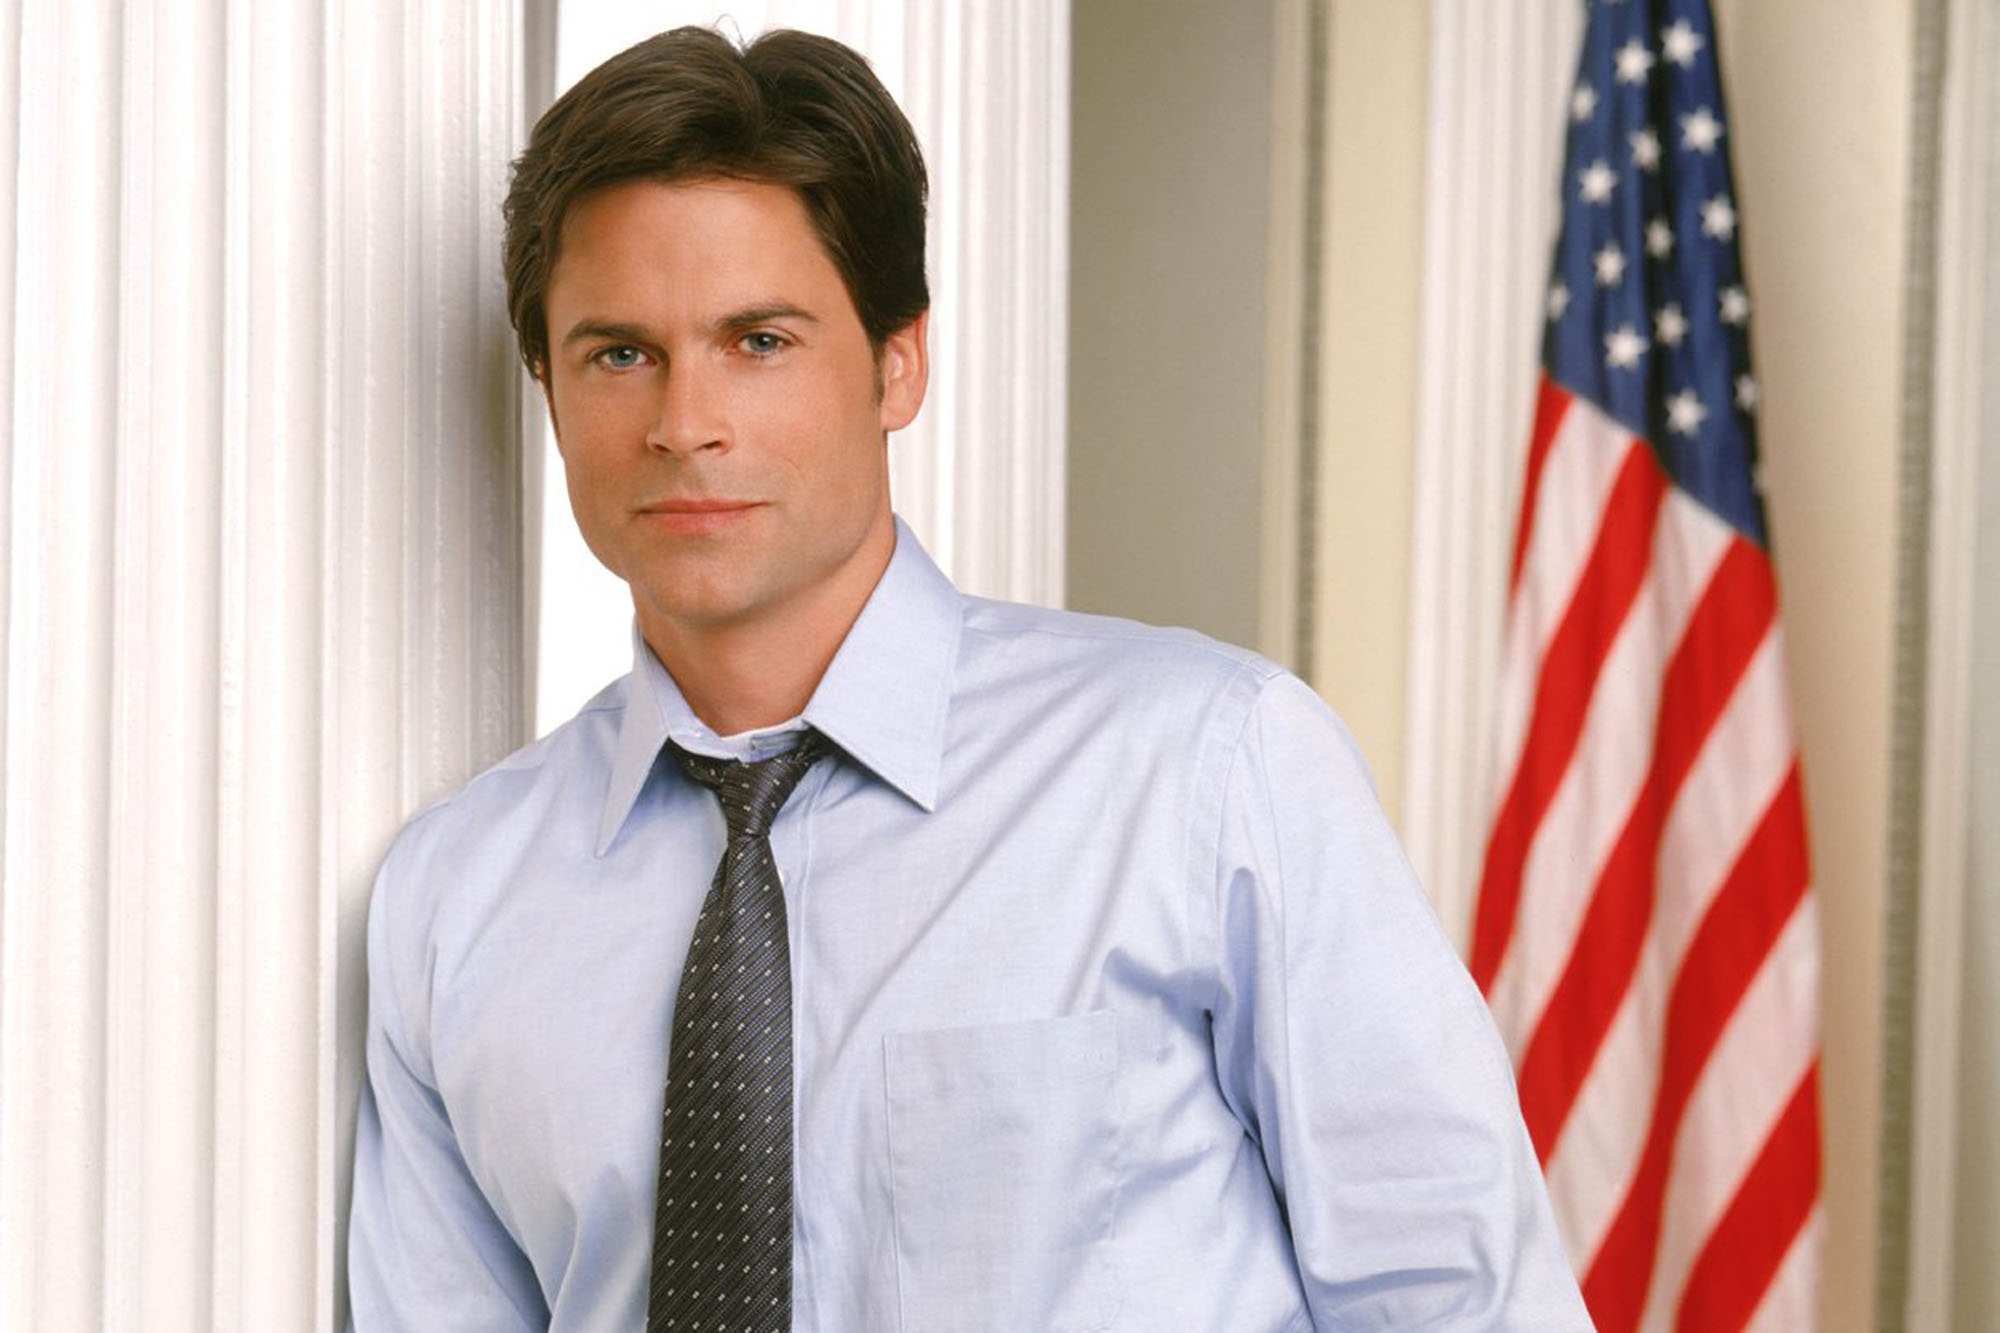 The West Wing (TV Series): Rob Lowe as Sam Seaborn, The deputy communications director to Toby Ziegler. 2000x1340 HD Background.